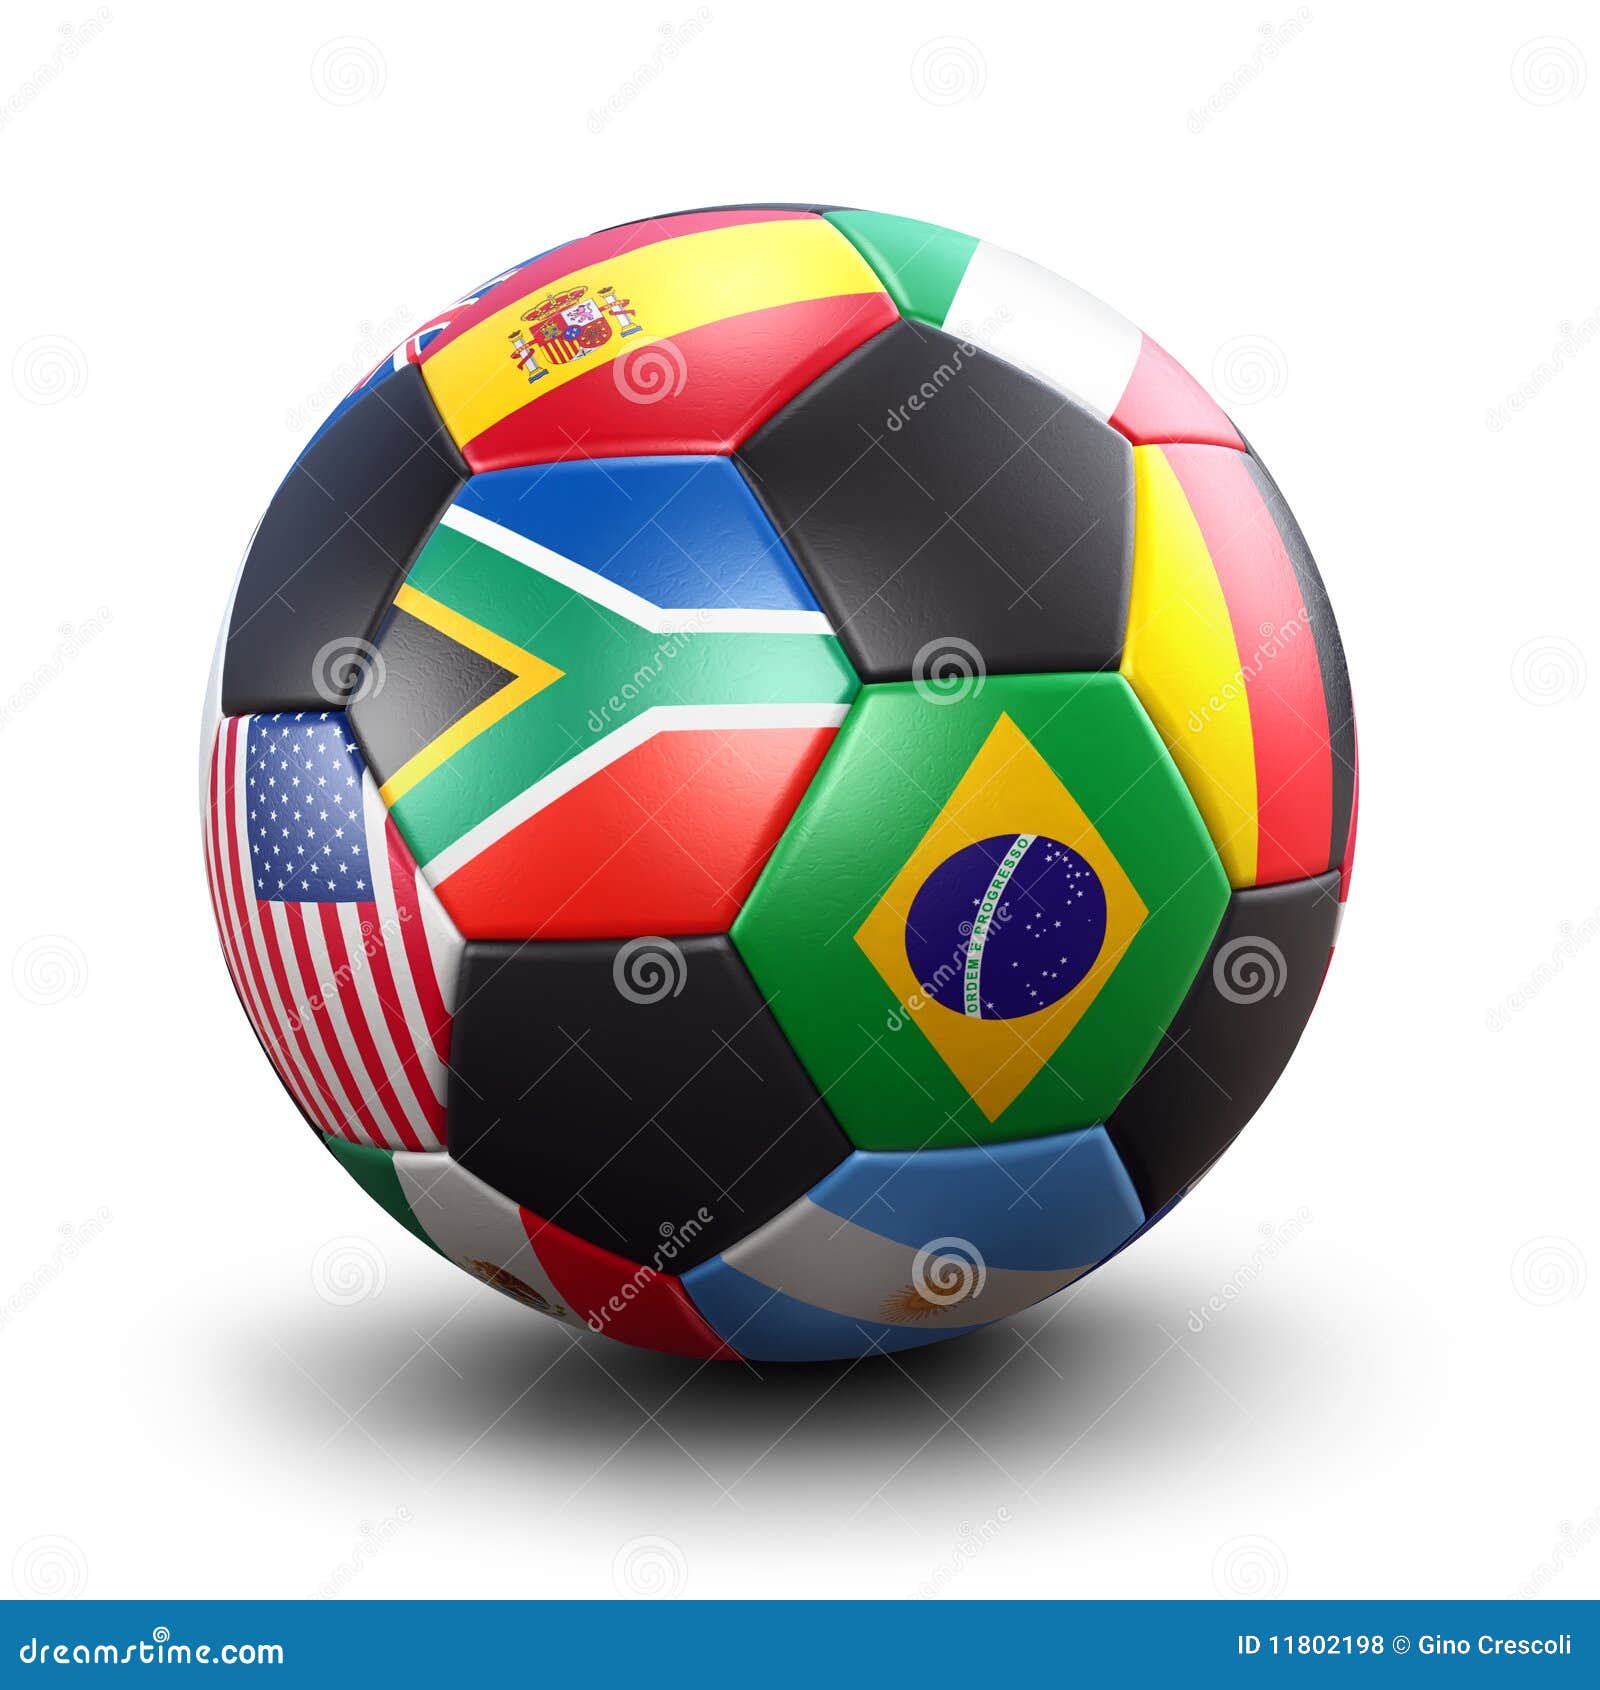 world cup football clipart - photo #32